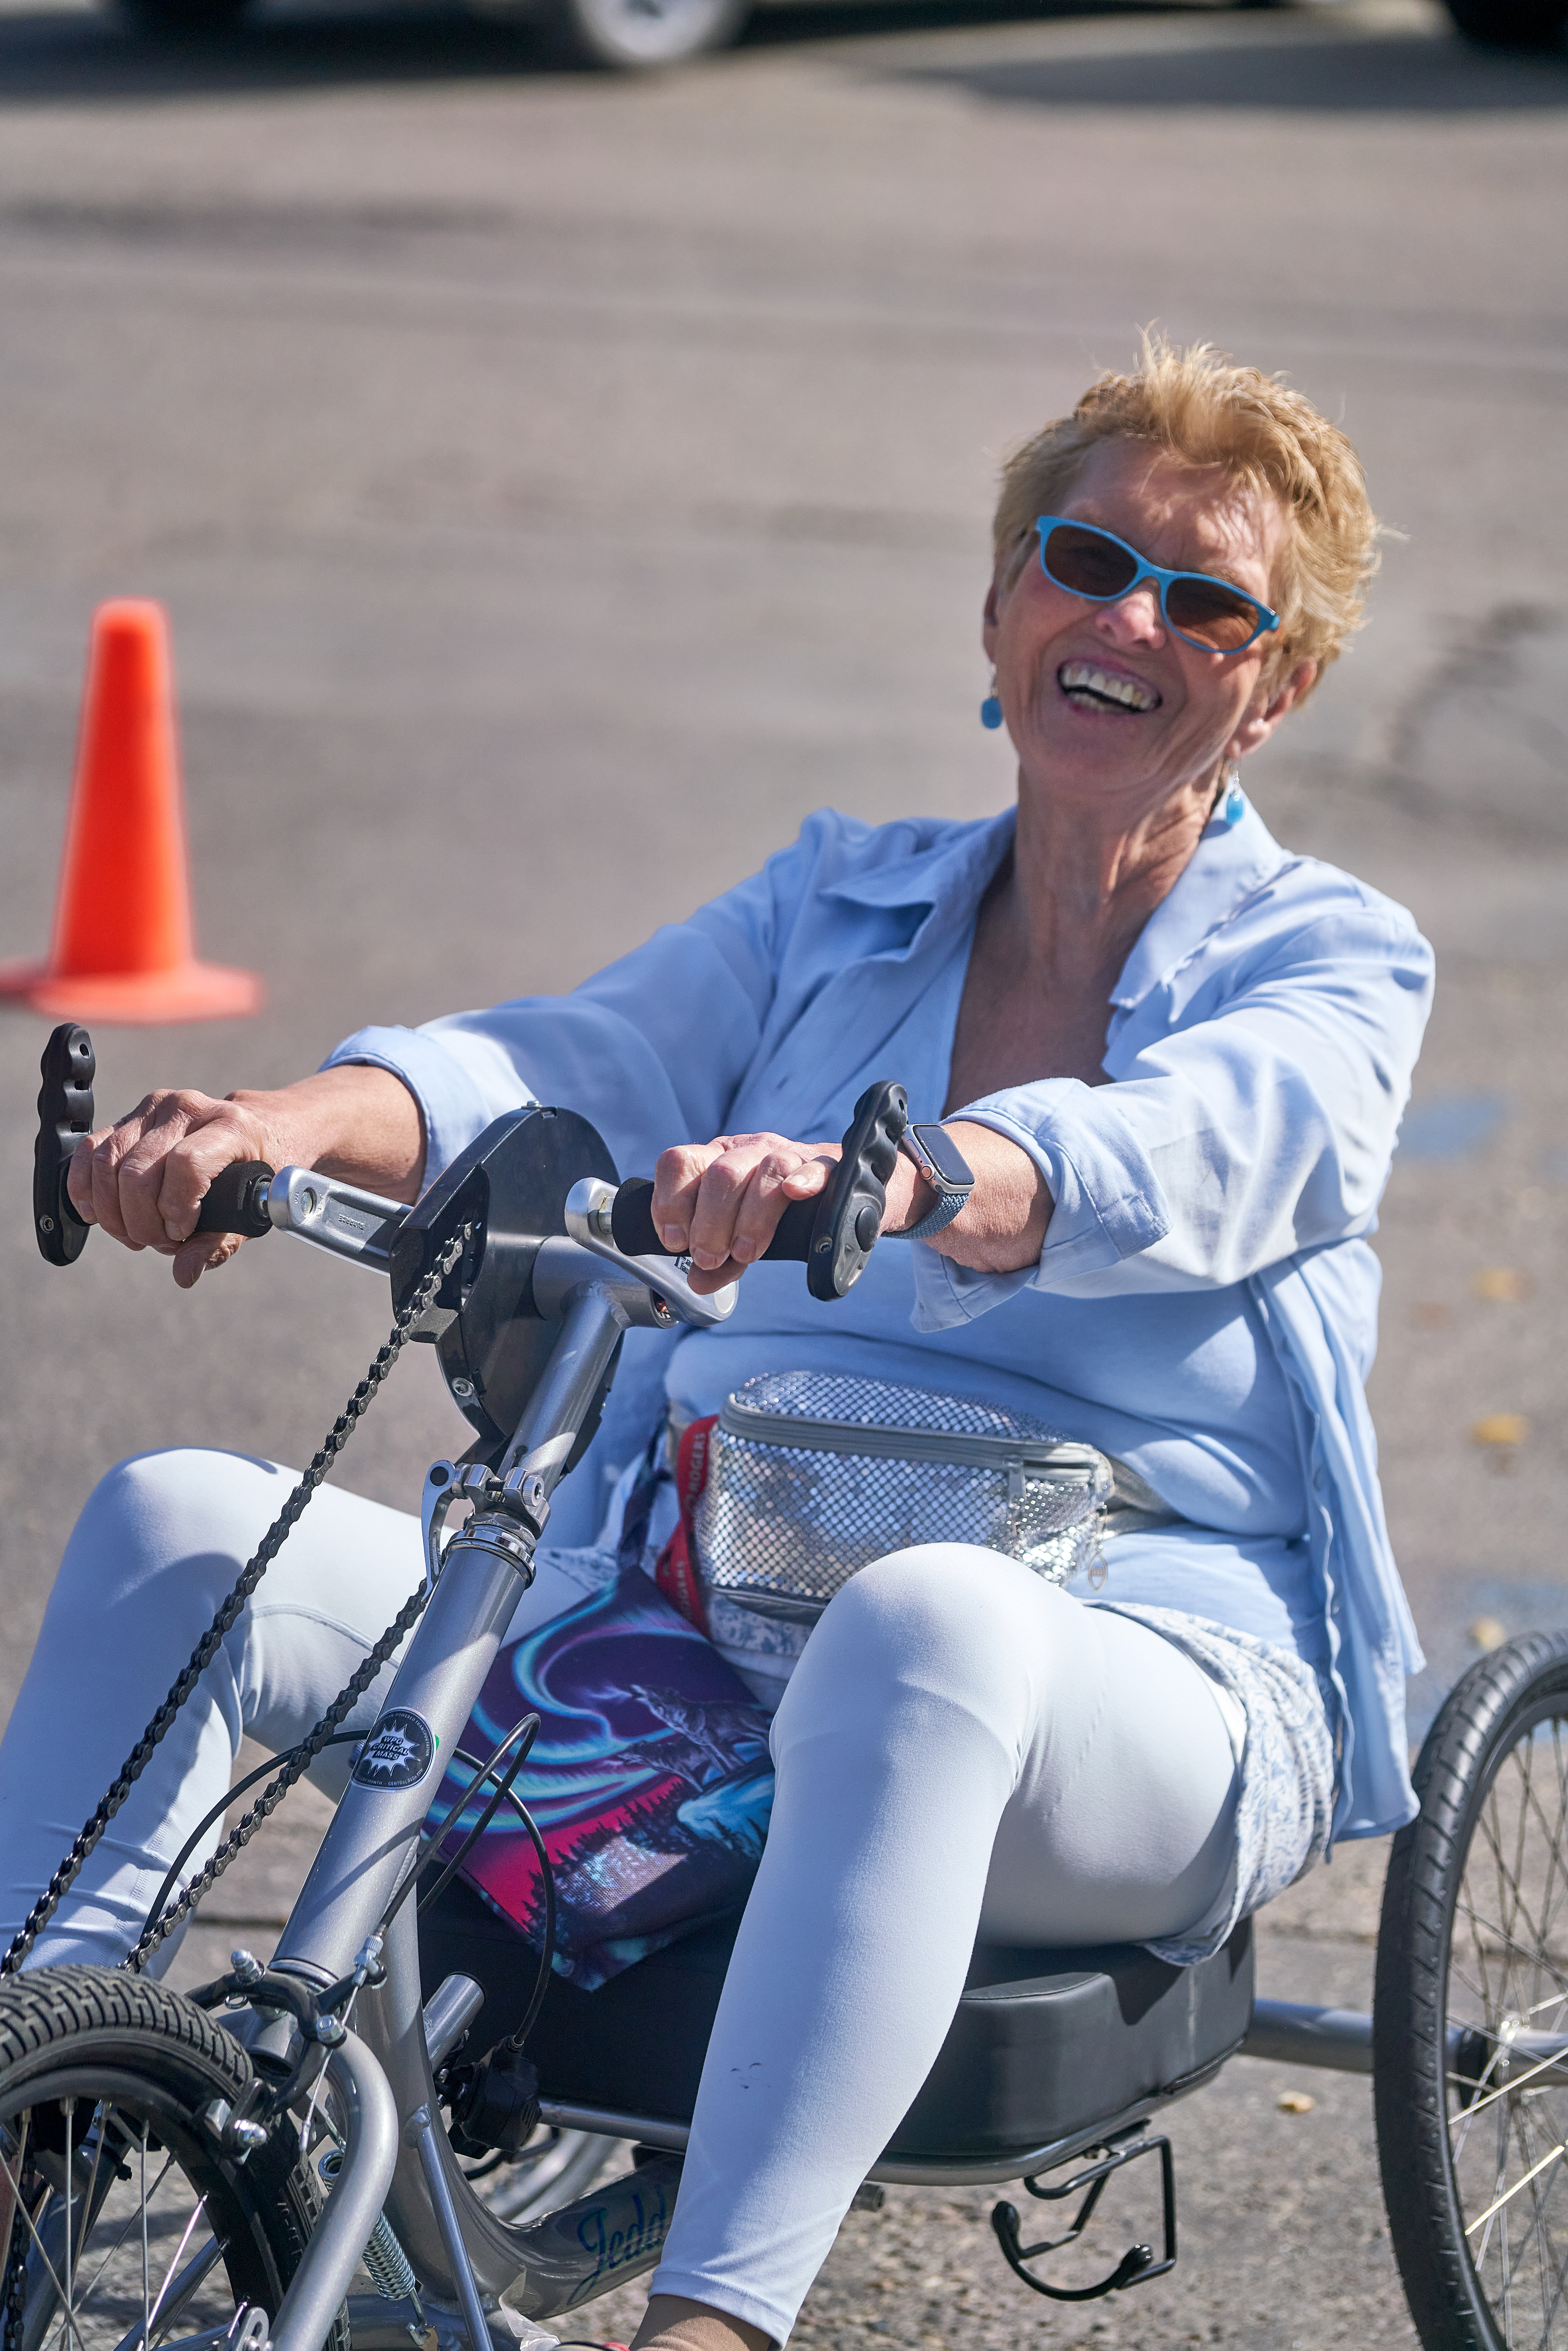 A woman with short hair and sunglasses rides a tricycle.